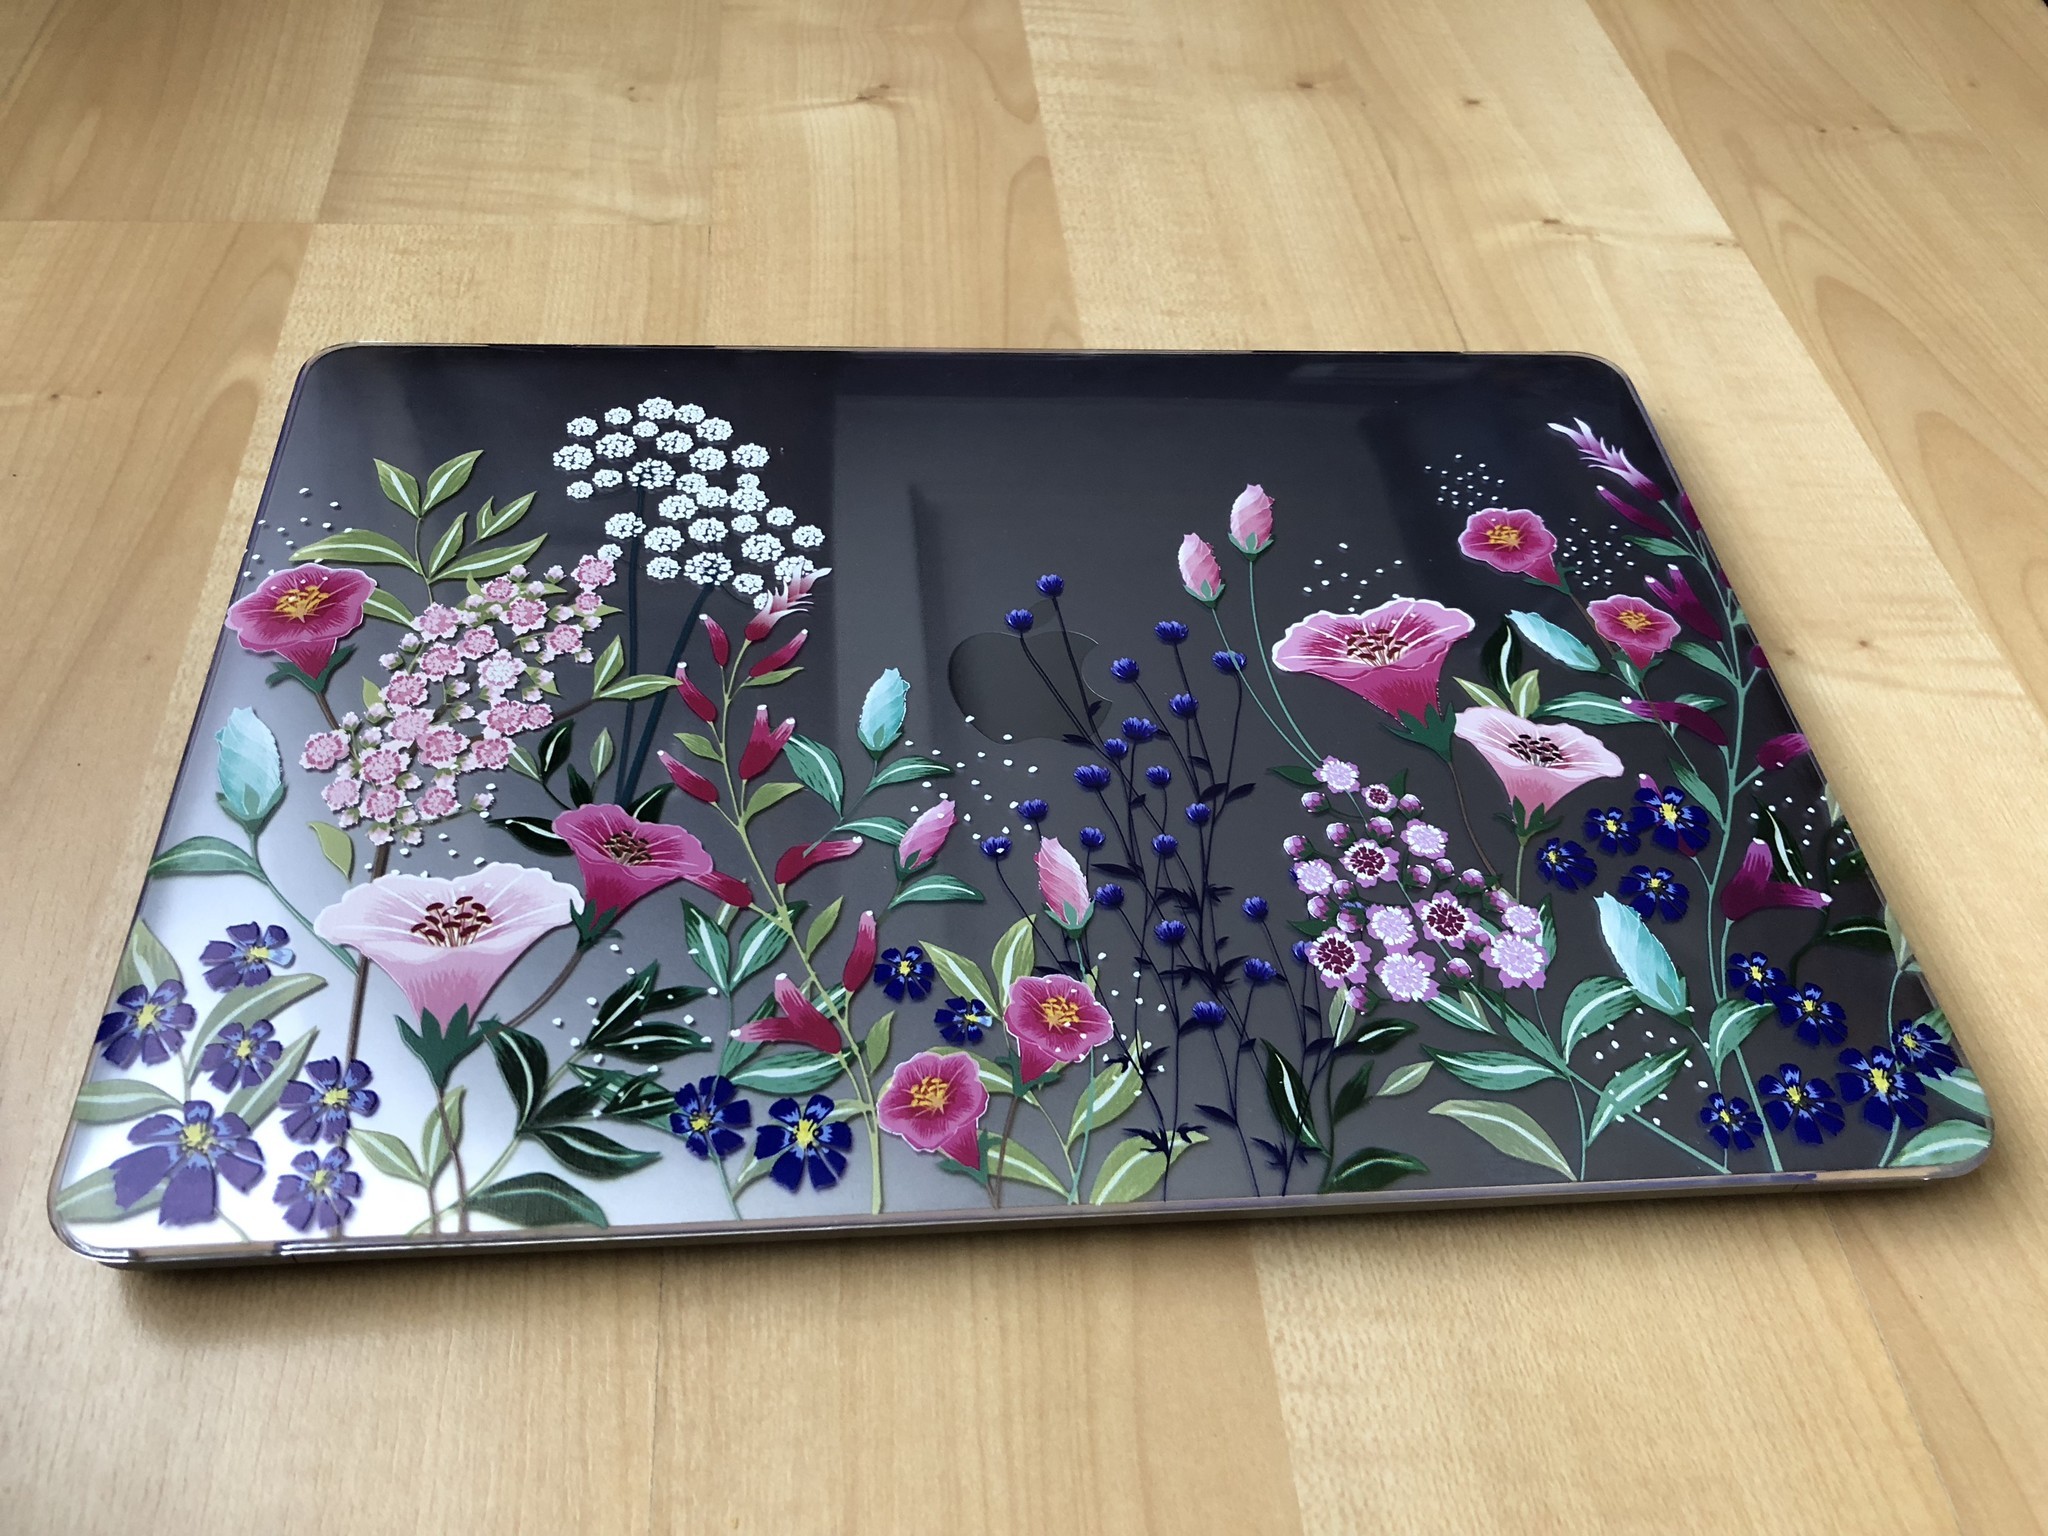 Laptop Cover Spring Cartoon Skunk Flowers Leaf Plastic Hard Shell Compatible Mac Air 11 Pro 13 15 Cover MacBook Air Protection for MacBook 2016-2019 Version